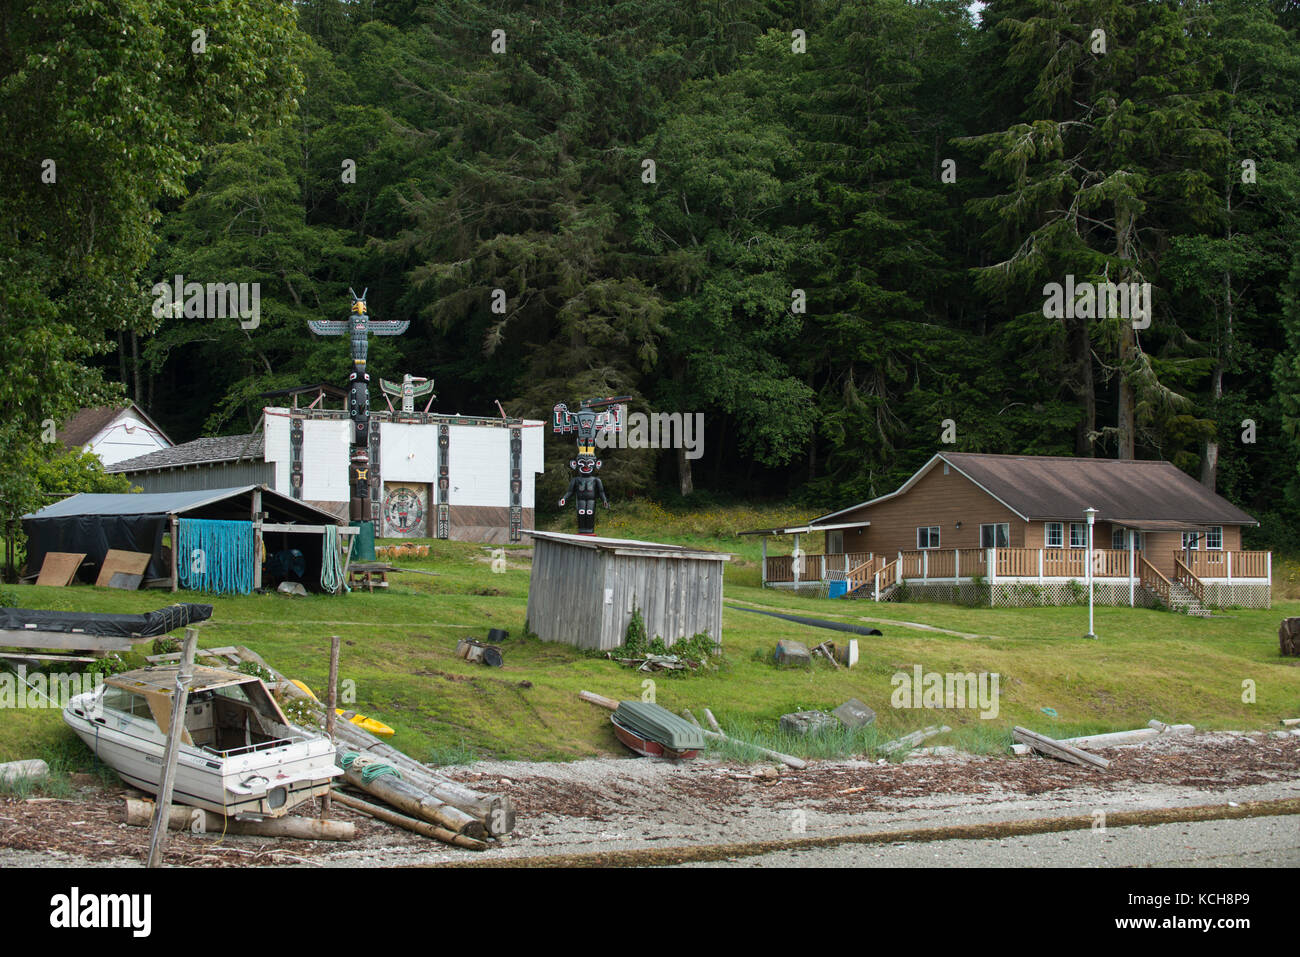 Big House and Totem Poles at Tsatsisnukwomi First Nations Village, also called New Vancouver, Broughton Archipelago, off northern Vancouver Island, British Columbia, Canada Stock Photo